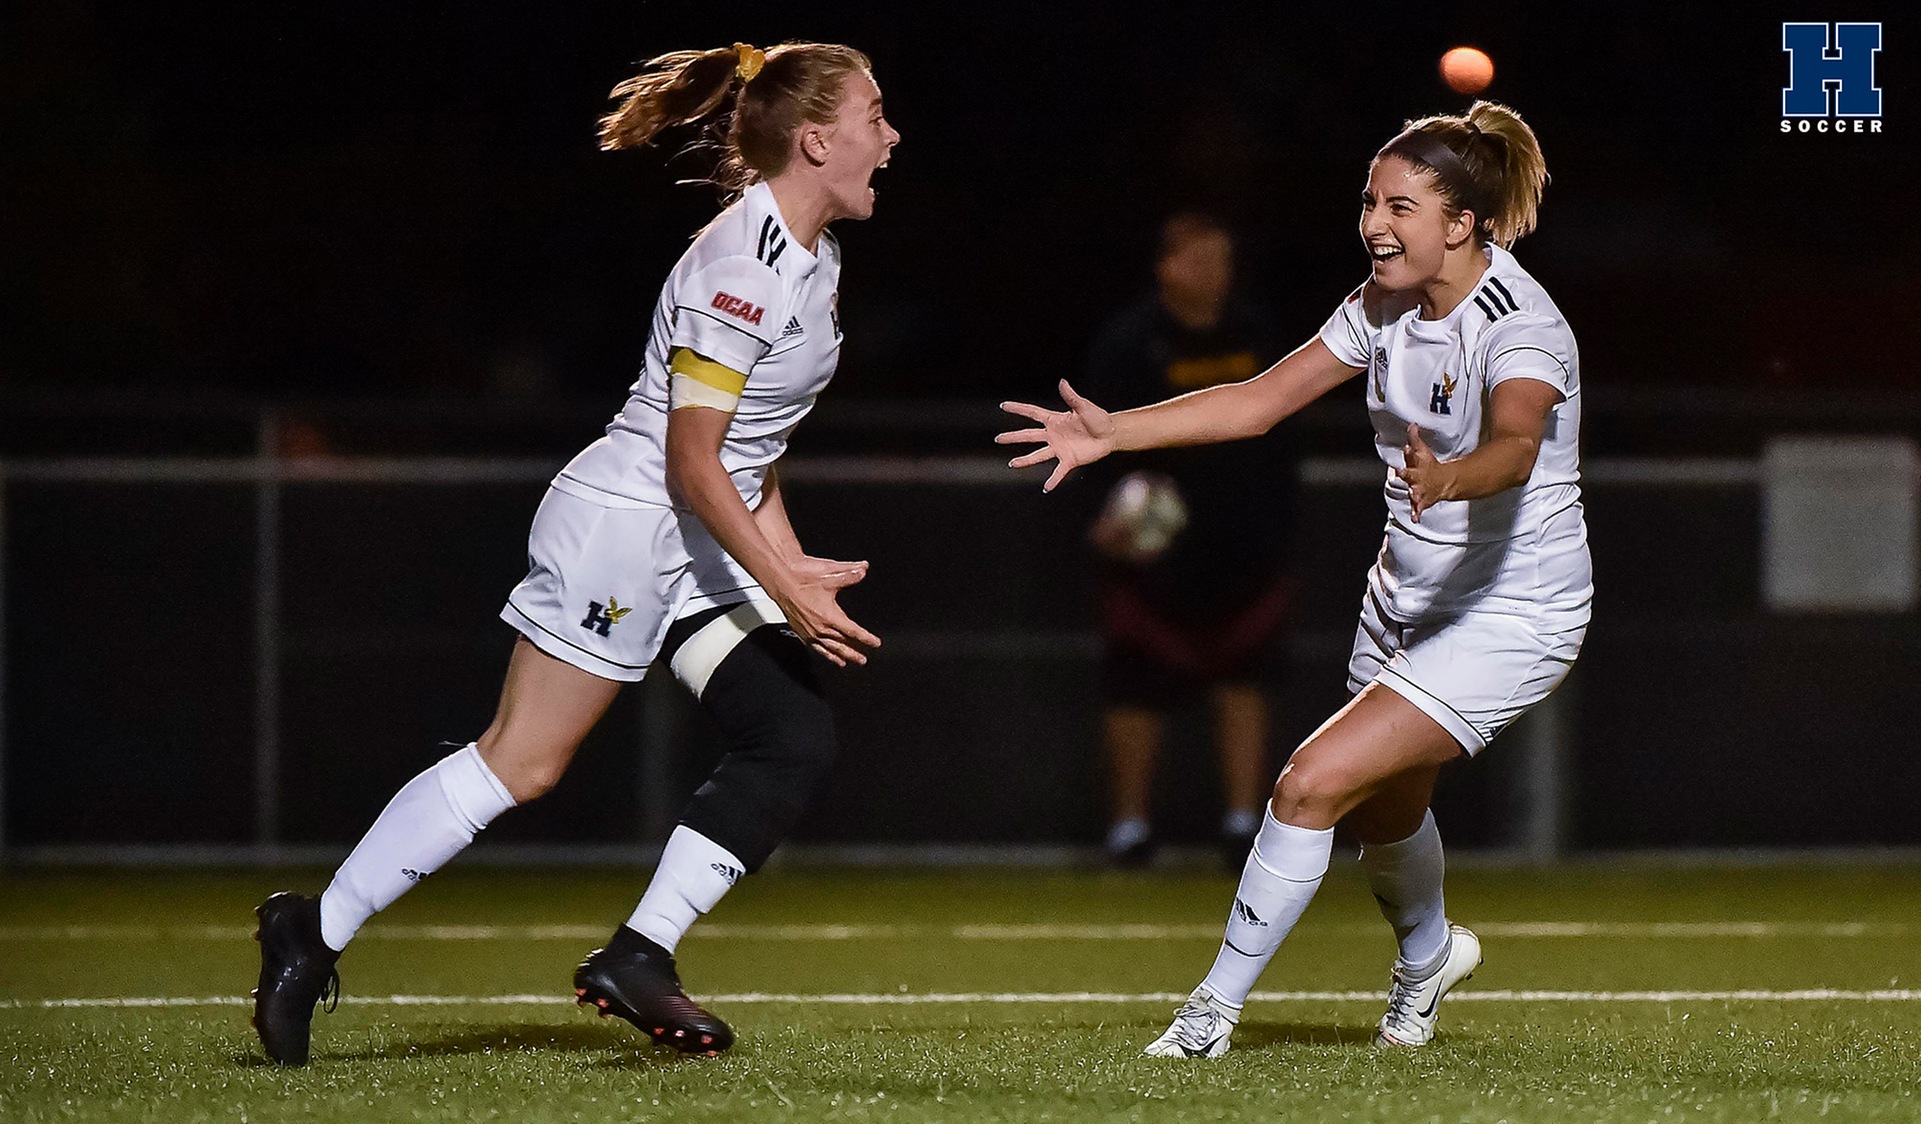 Late Game Heroics From Stushnoff Lifts Humber Over Sheridan, 3-2